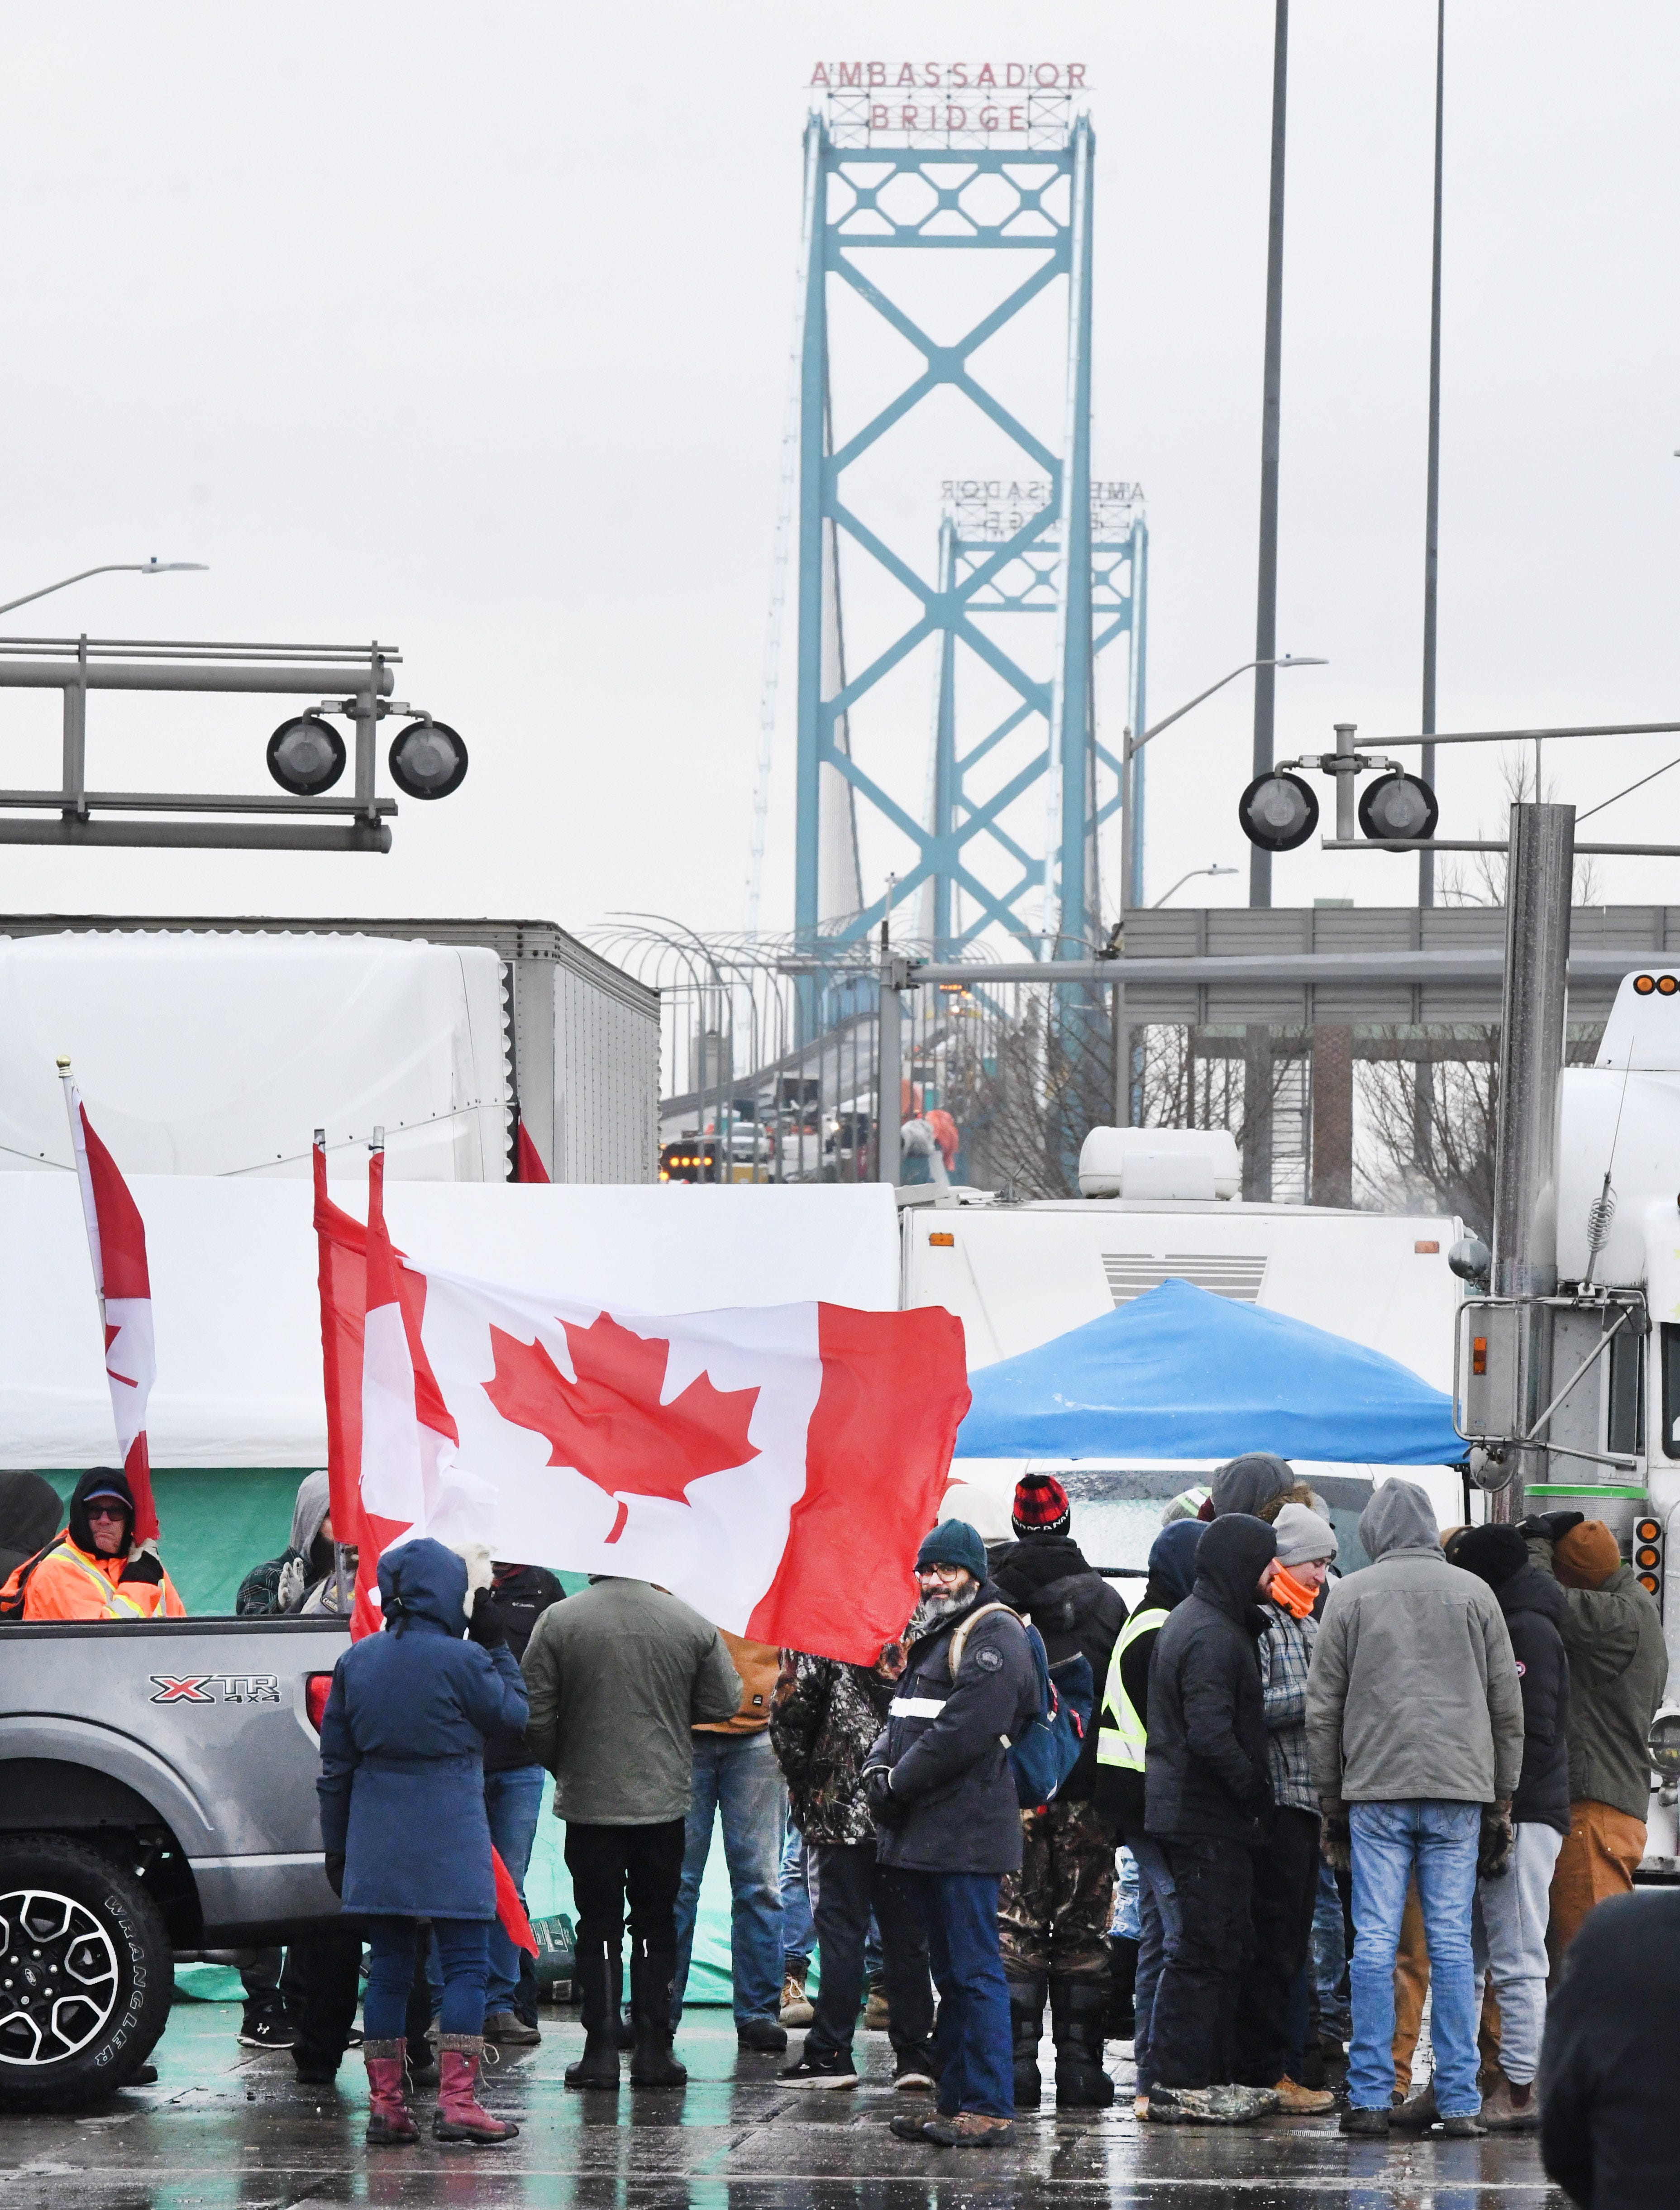 Canadian truckers protests against COVID measures on corner of Huron Church Road and Tecumseh, with the Ambassador Bridge in the background, in Windsor, Canada on February 11, 2022.